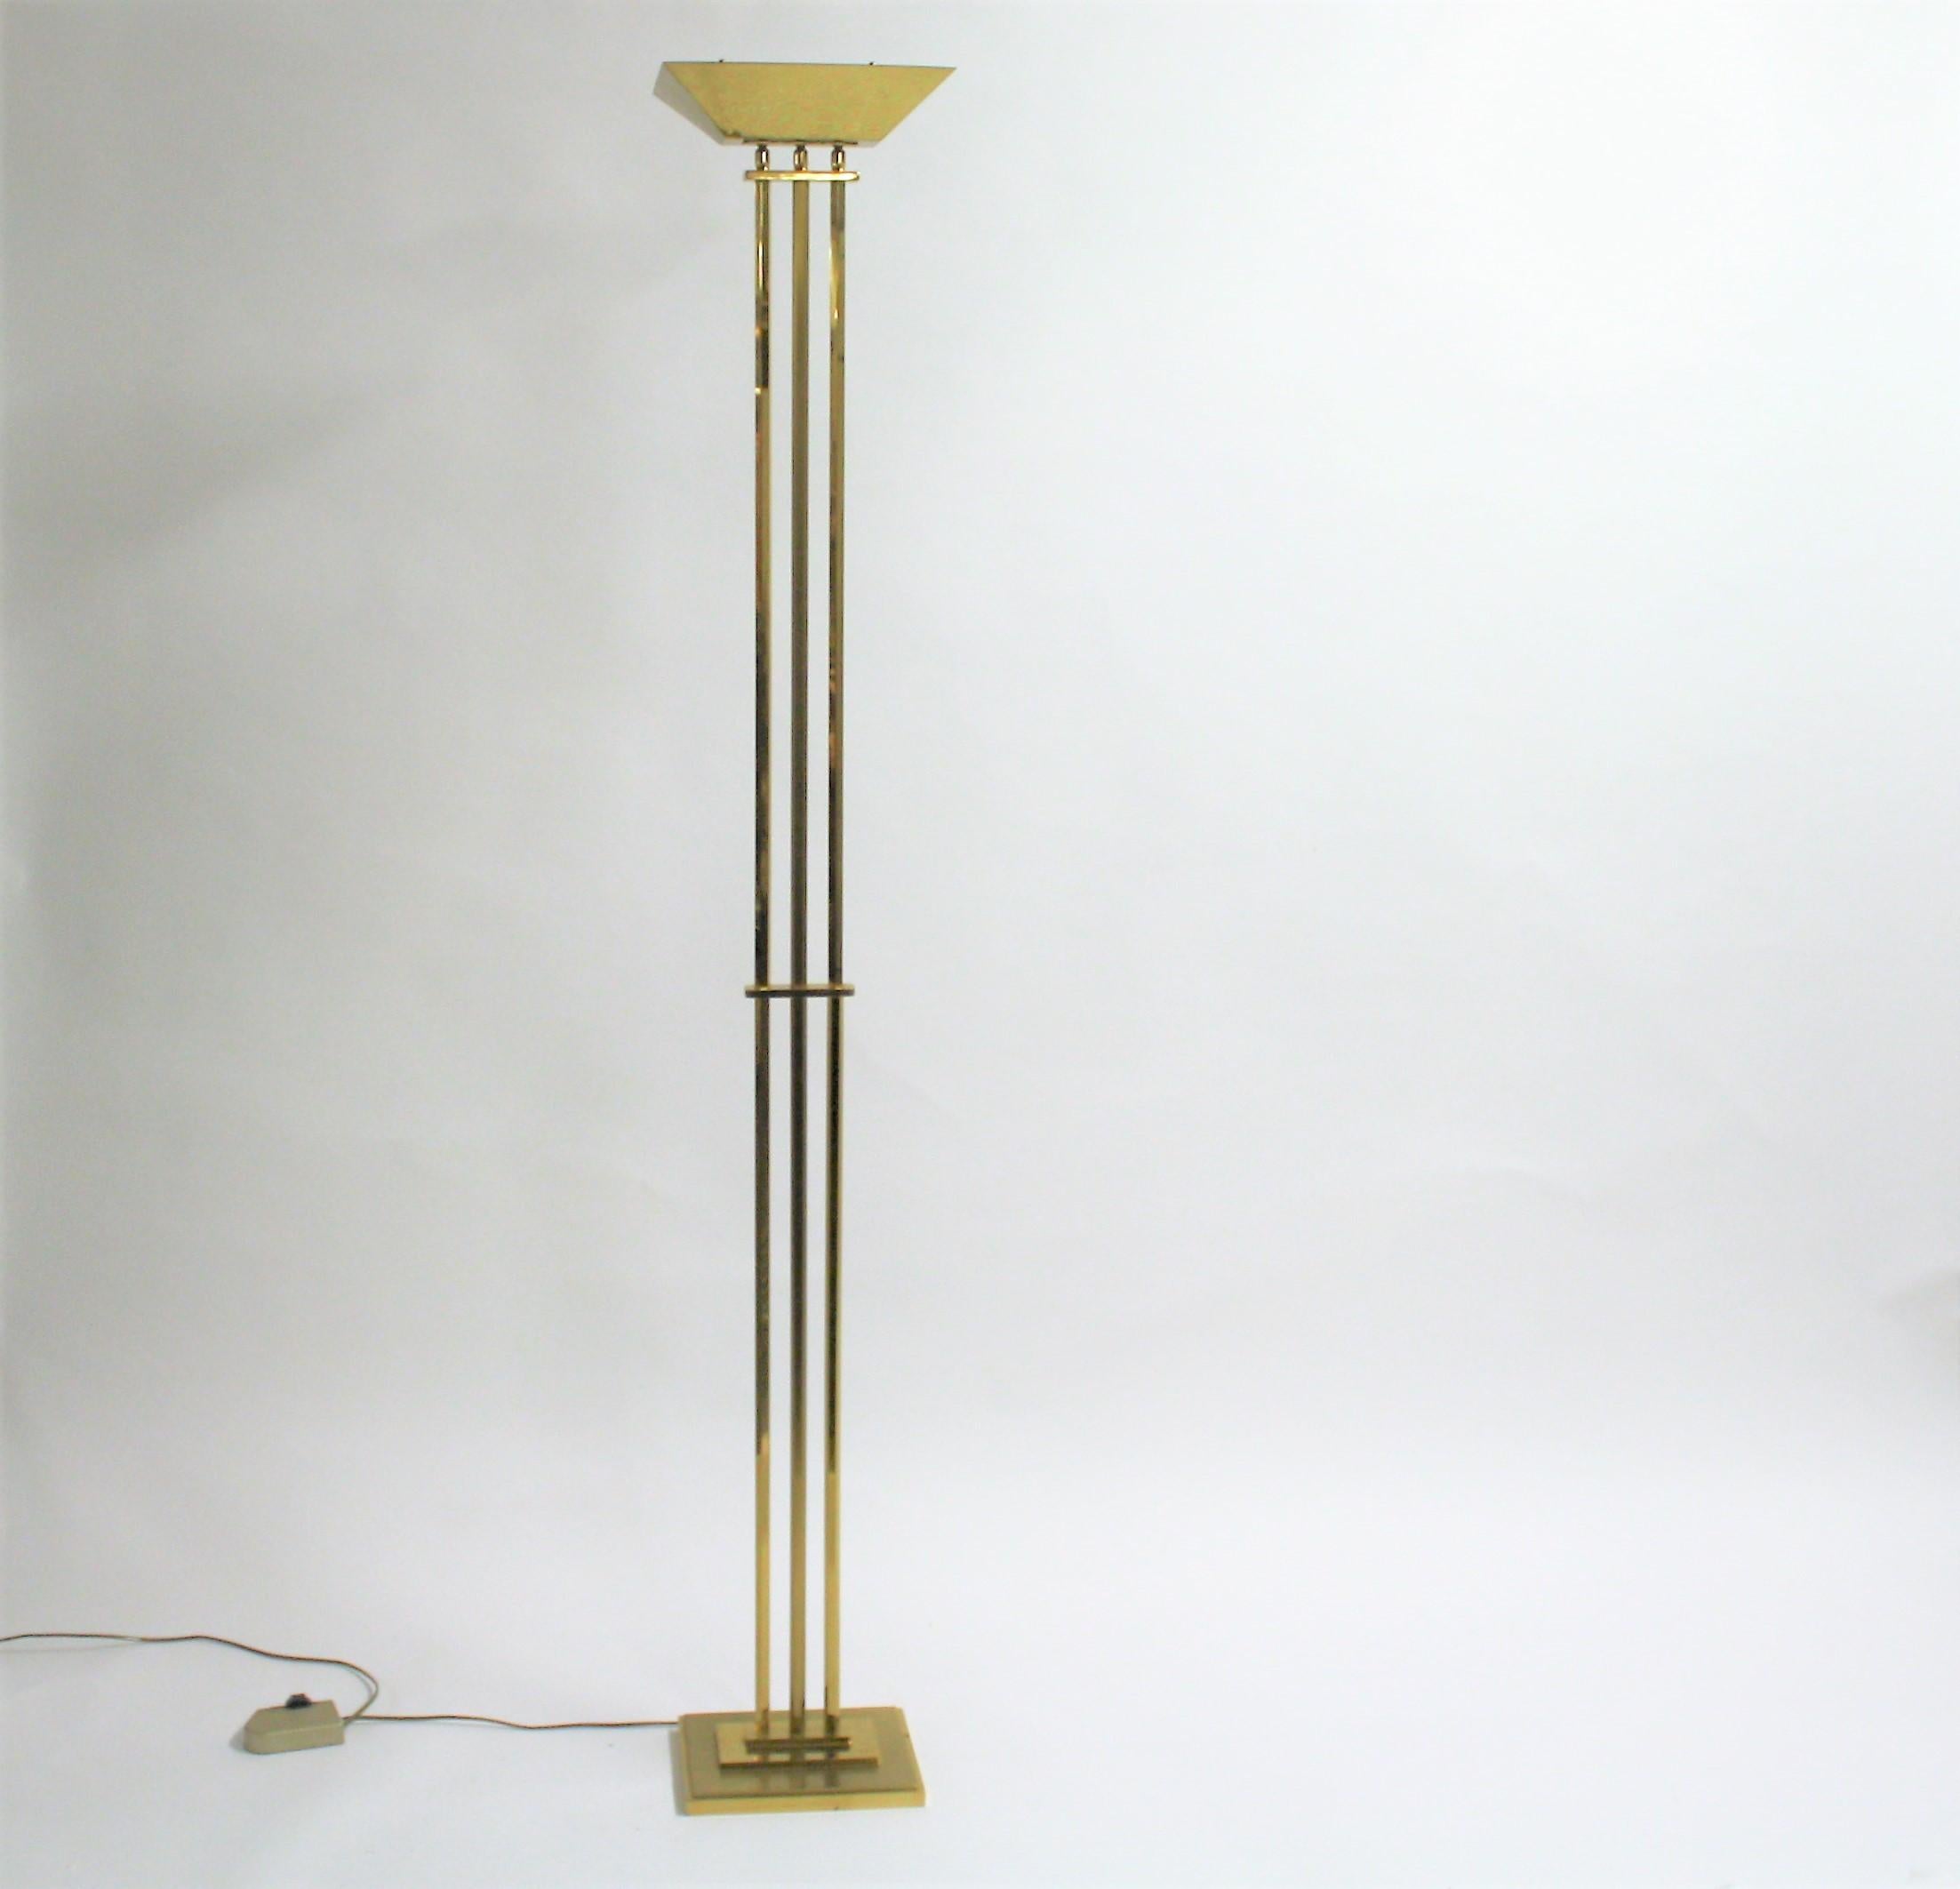 Charming lamp from the manufacturer 'Deknudt' in the style of Willy Rizzo. 

The lamp is made out of brass and has a glass plate above the light bulb to created a diffuse light.

The lamp works with a R7 light and is dimmable.

1970s -